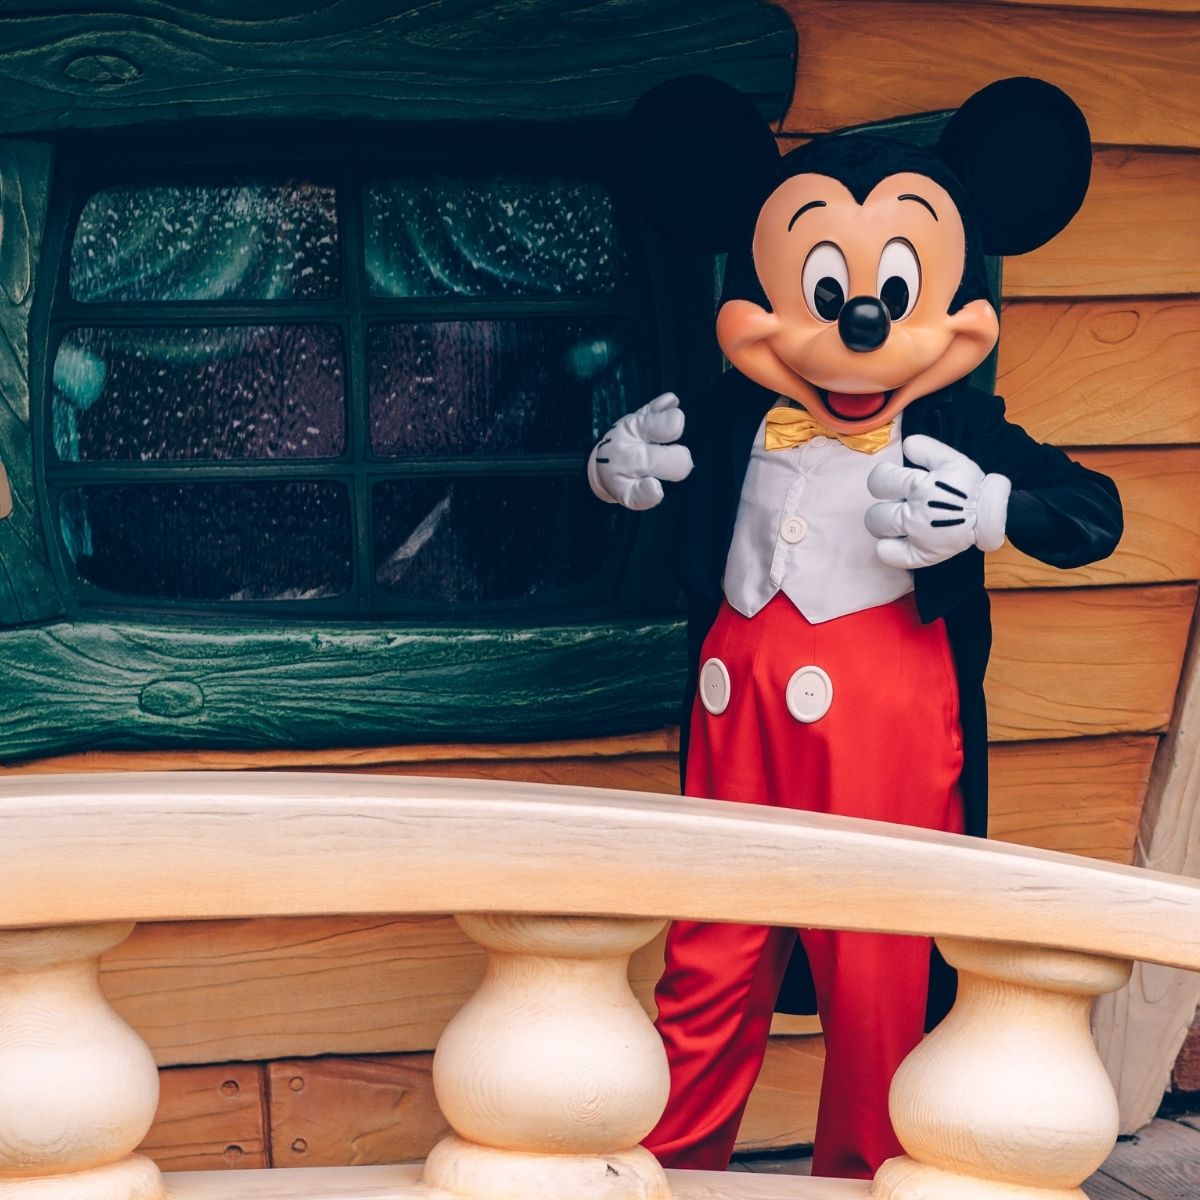 Mickey Mouse is waiting for a visit on his front porch.